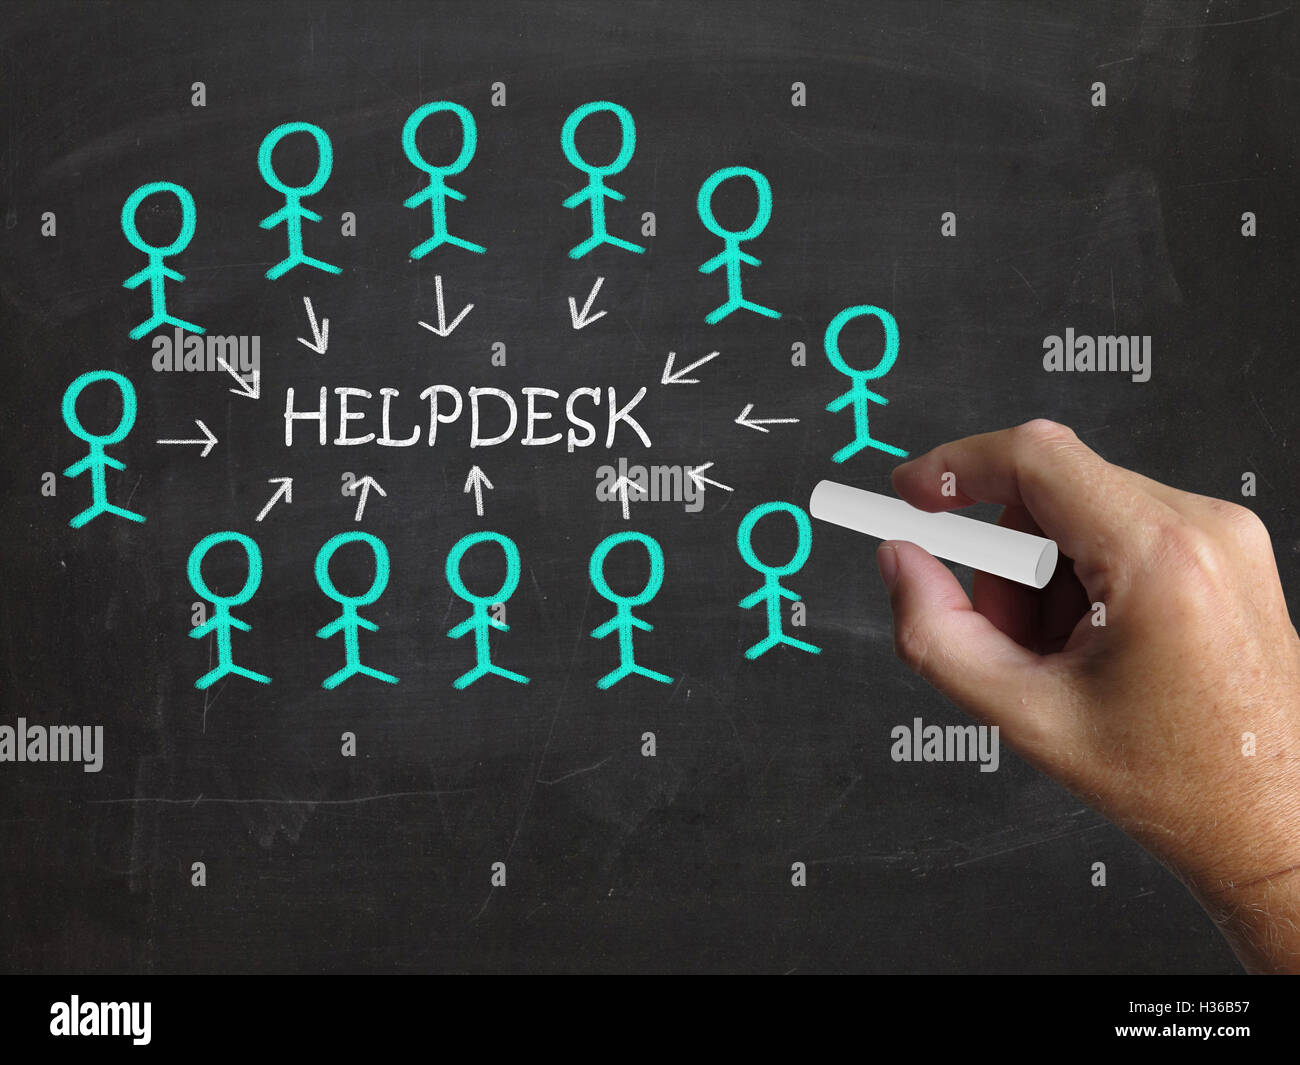 Helpdesk On Blackboard Means Customer Support And Assistance Stock Photo